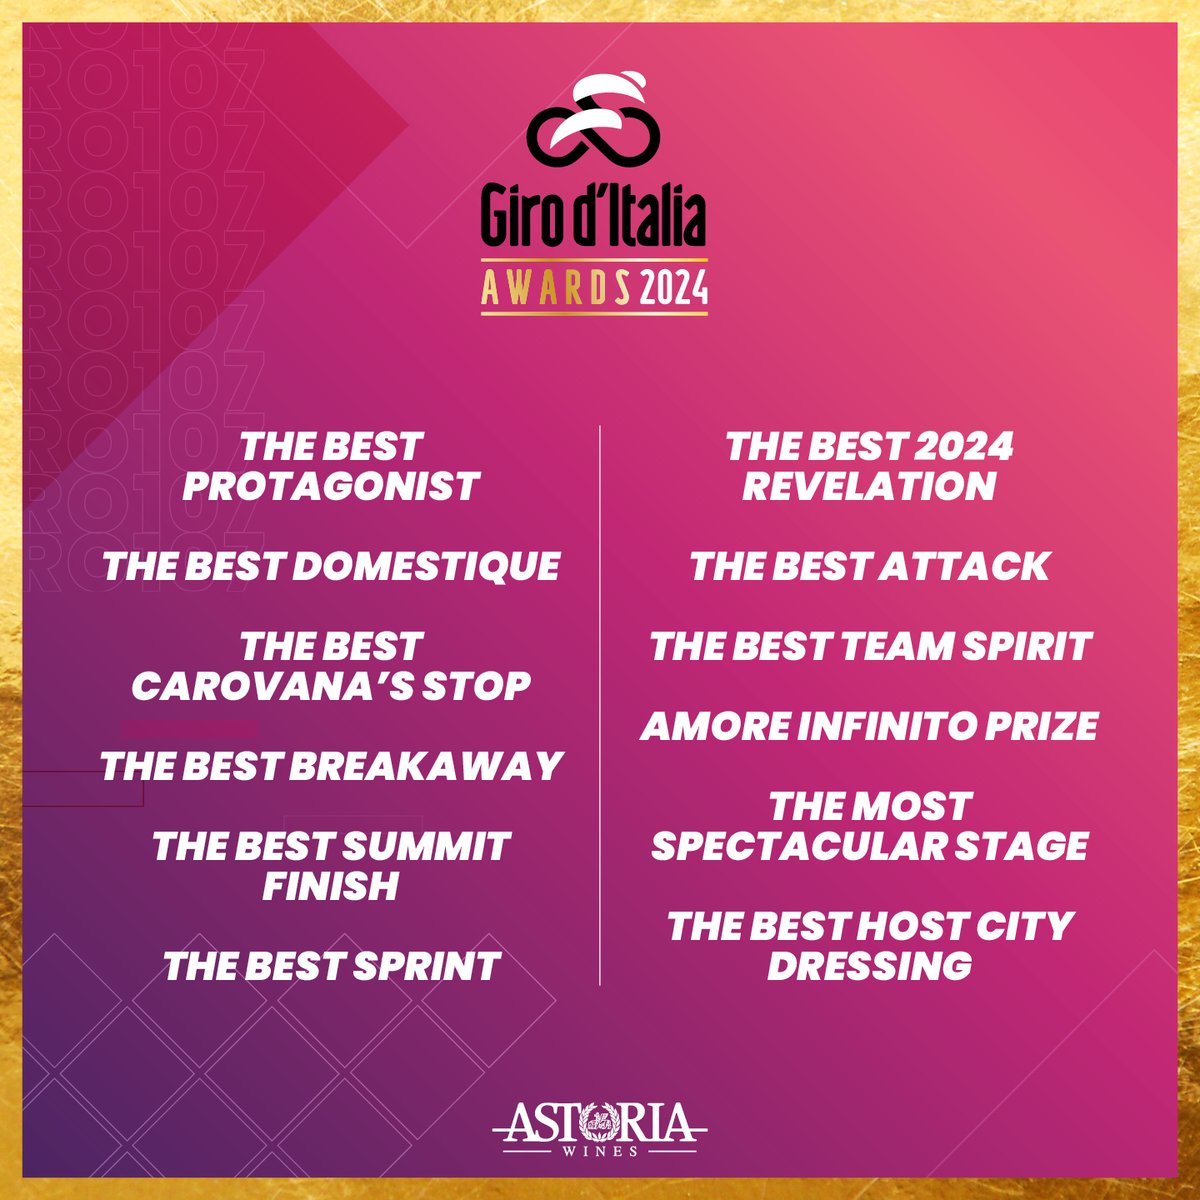 🏆 The 'Giro d'Italia Awards' are back ! 12 categories, each with 2 nominees. You can vote your favorite nominee through our Instagram Stories starting tomorrow at 12 noon! . 🏆 Tornano i “Giro d’Italia Awards”! 12 categorie, ognuna con 2 candidati. Potrai votare attraverso le